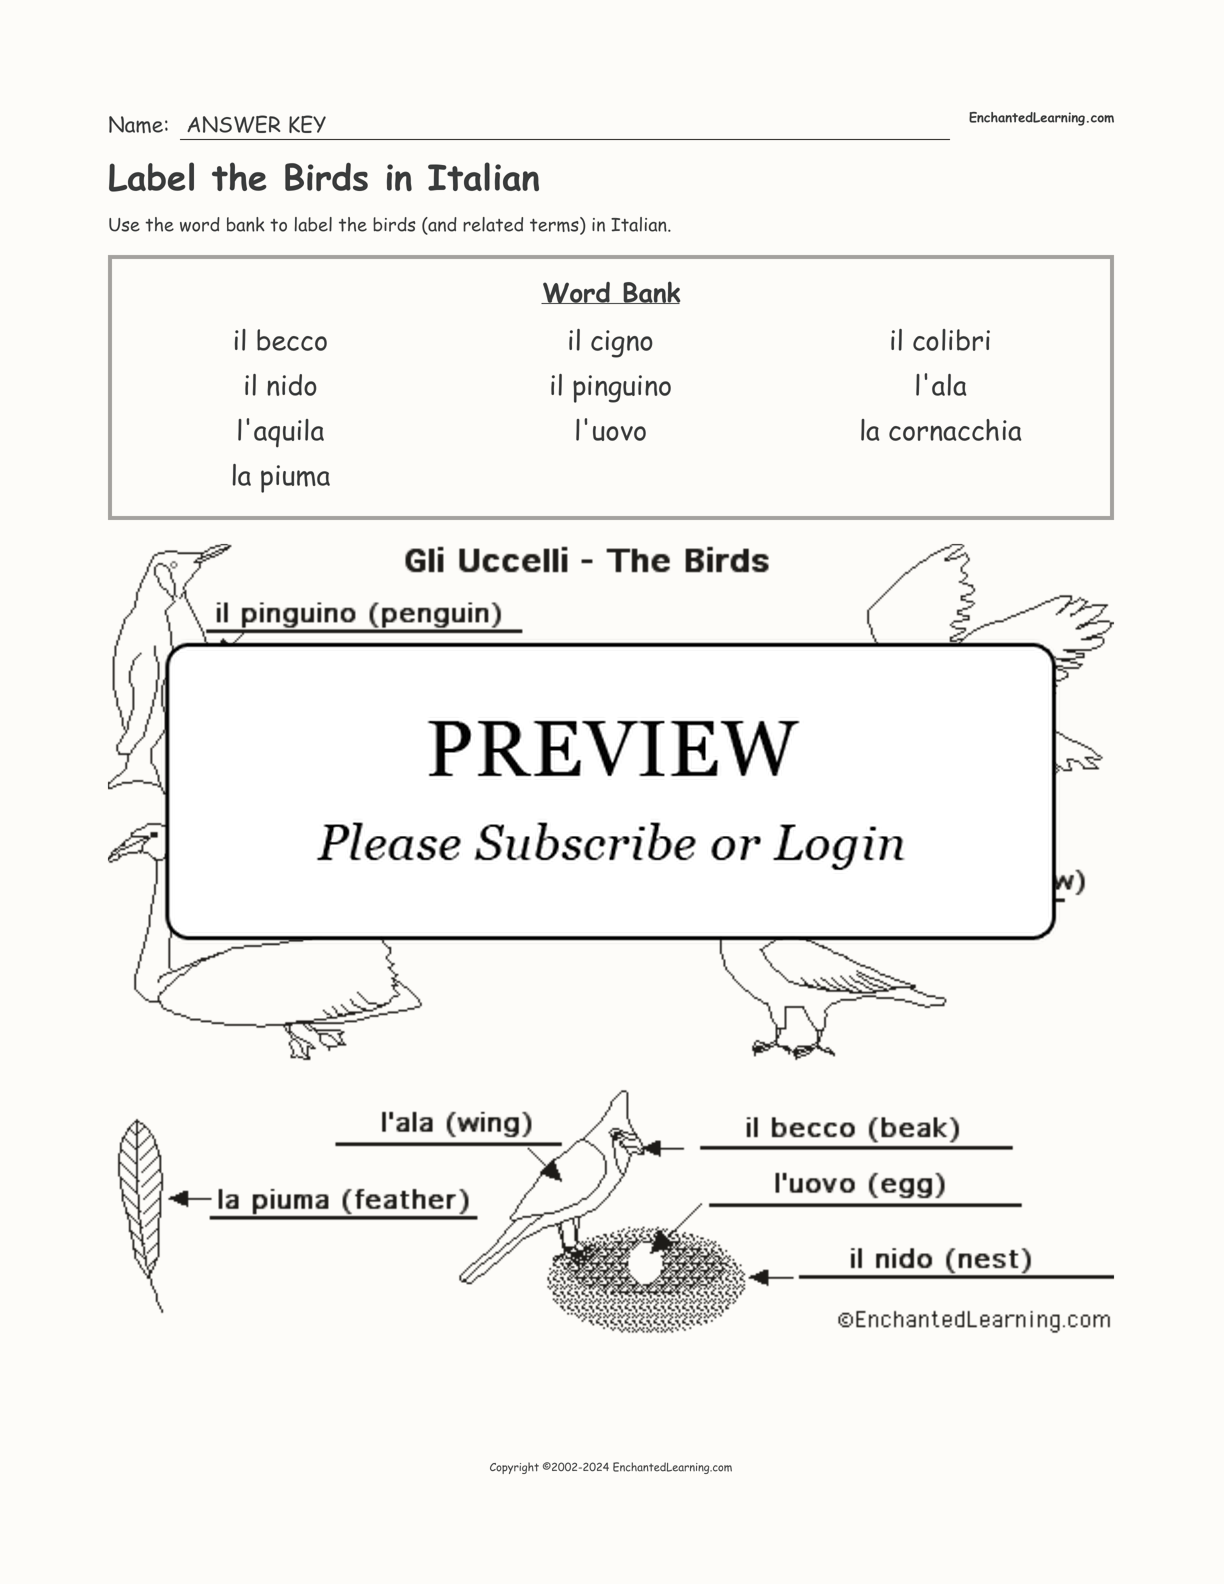 Label the Birds in Italian interactive worksheet page 2